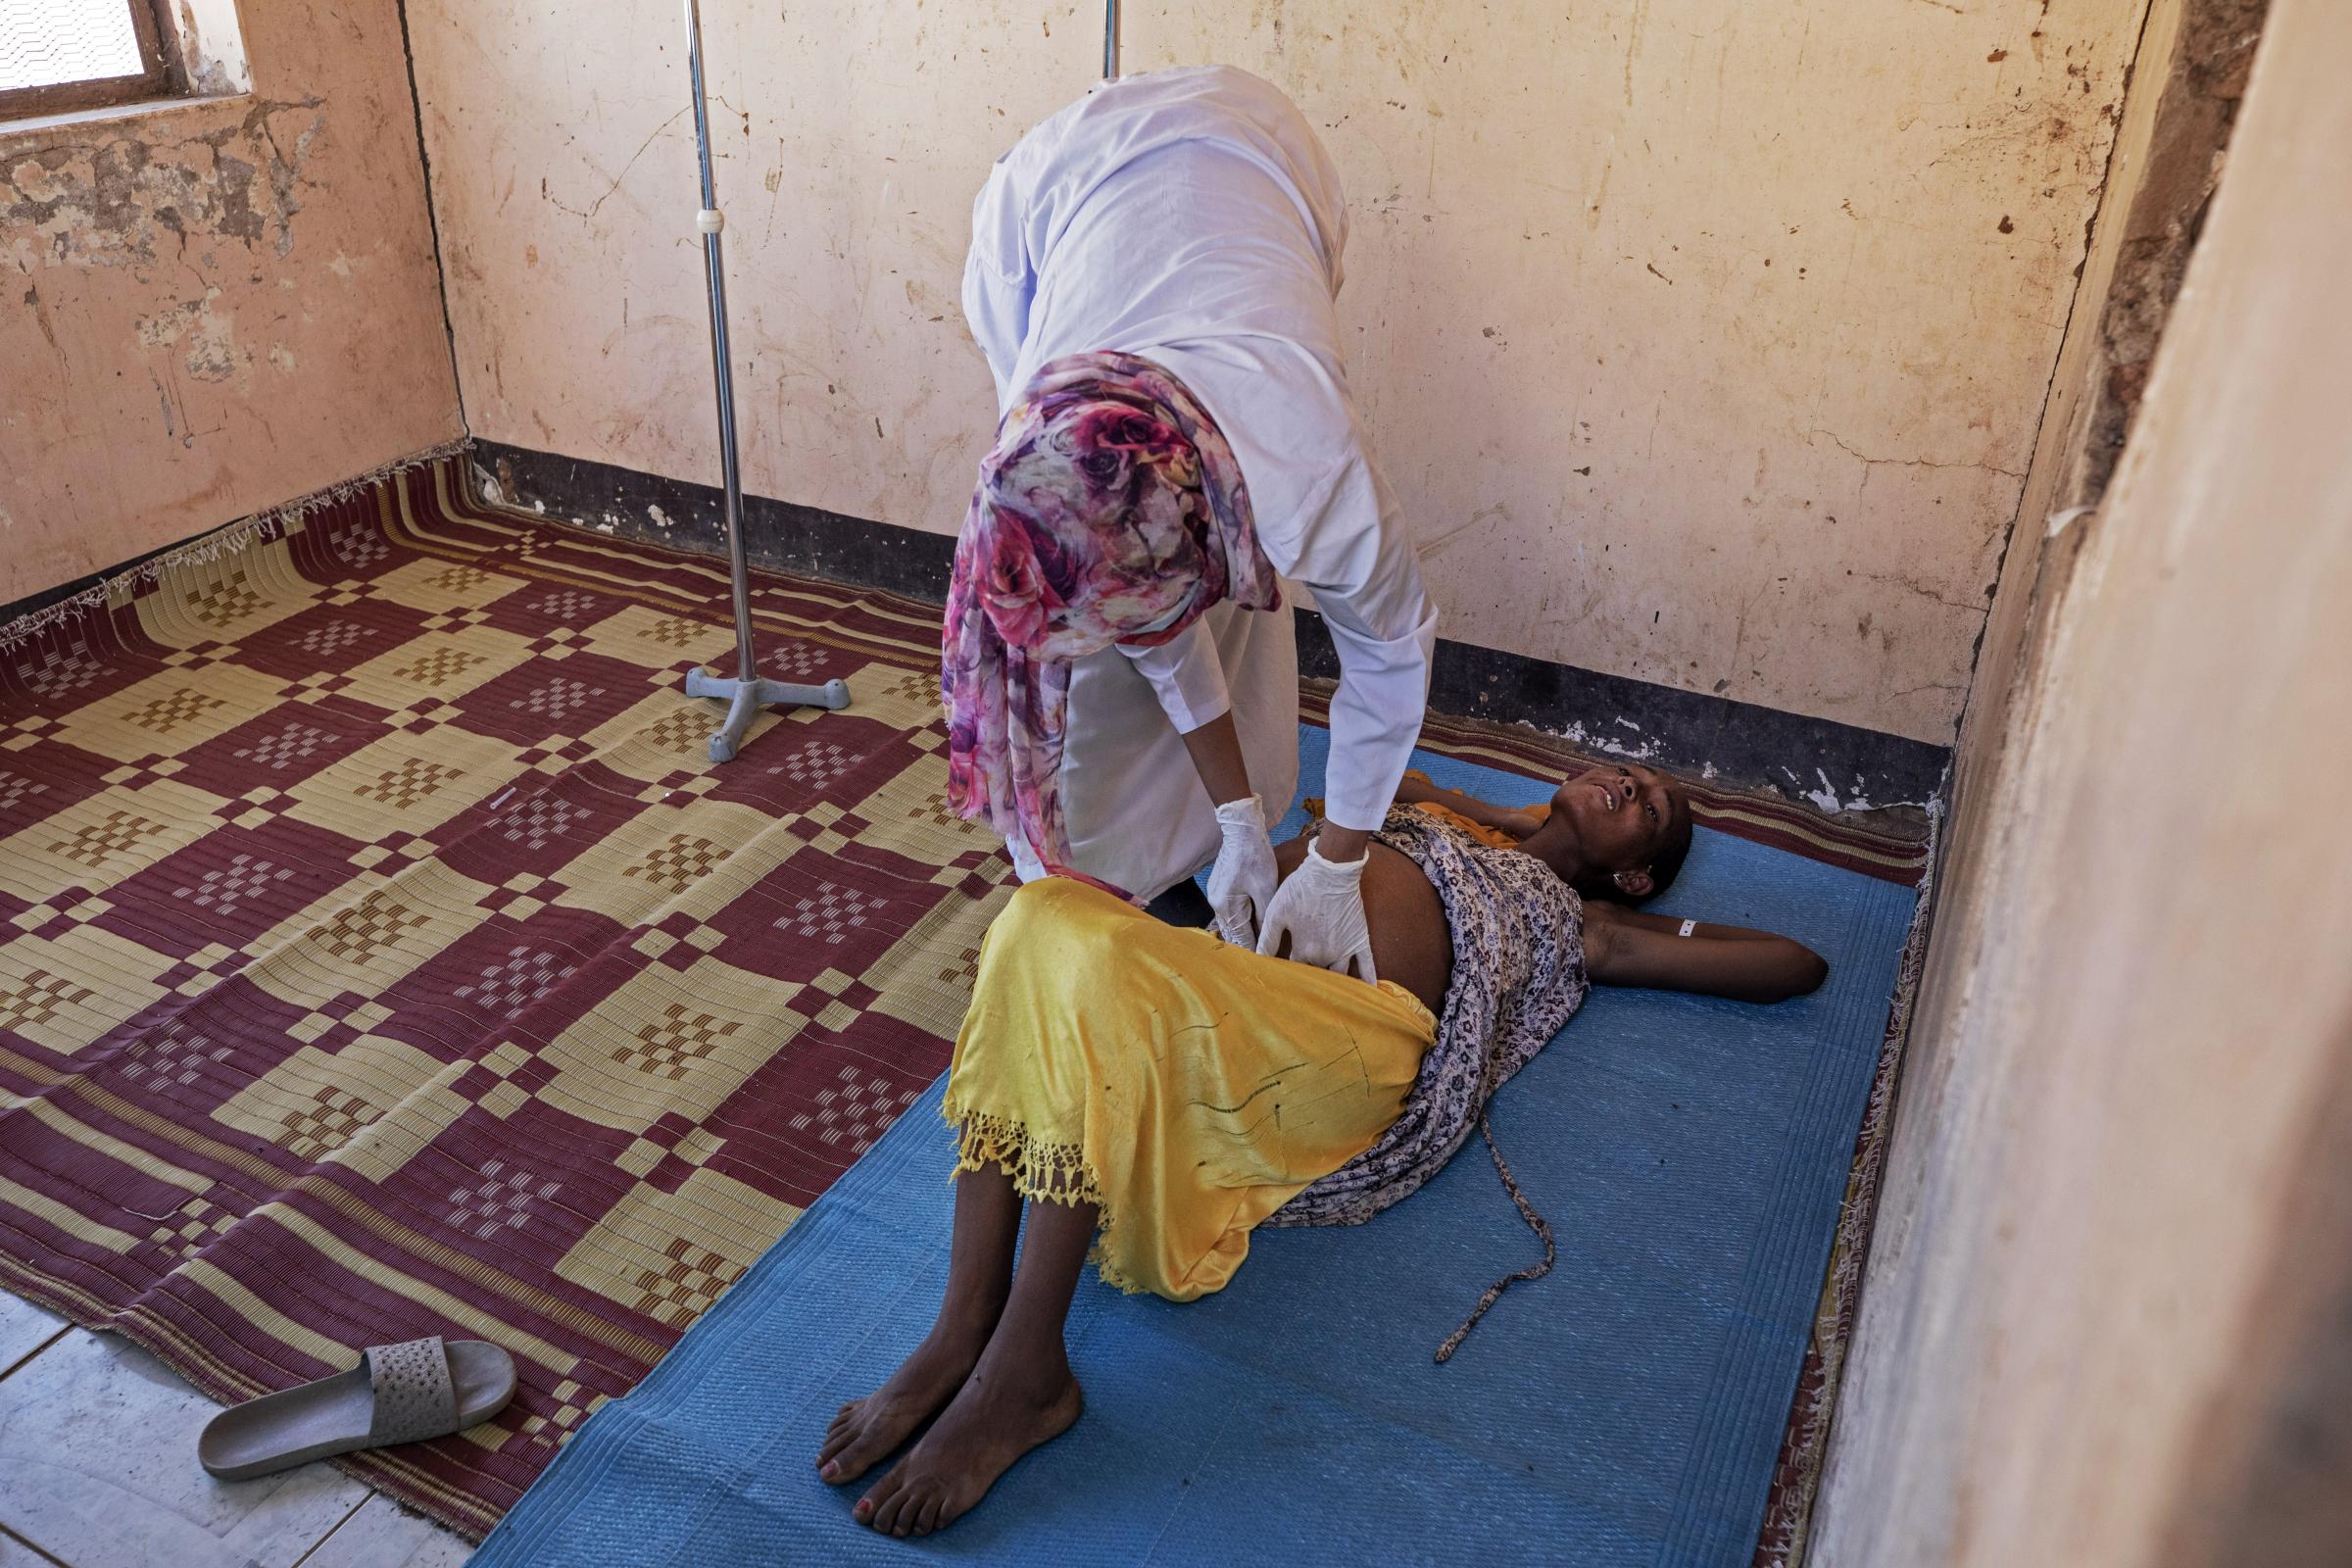 A Sudanese midwife checks a malnourished 9-month pregnant woman inside the Mercy Corps clinic at Umm Rakouba refugee camp.